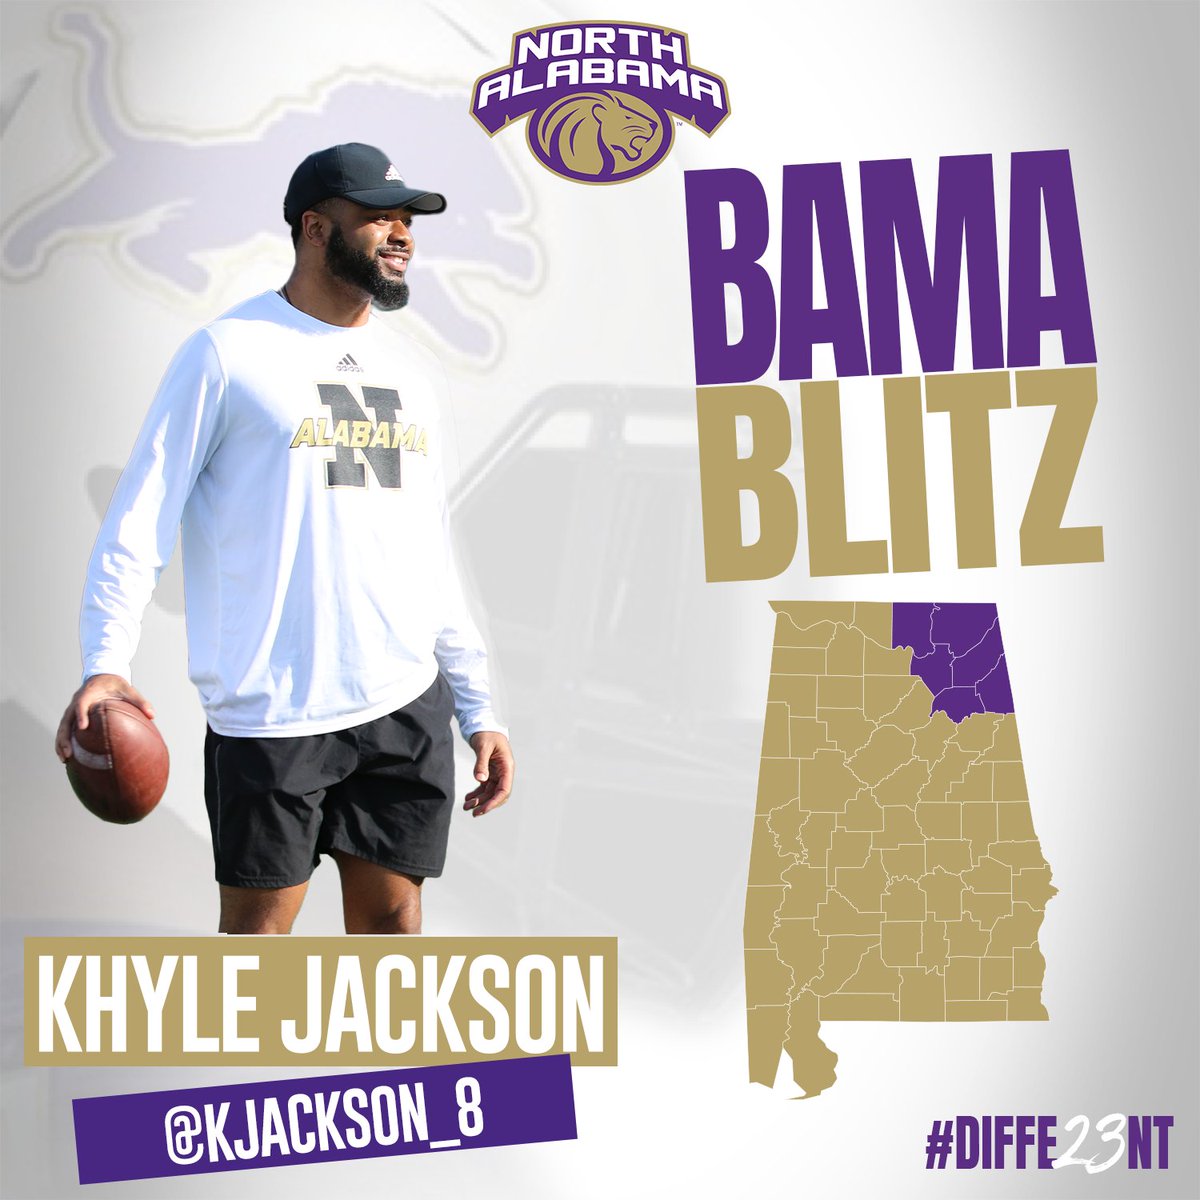 This Bama Blitz is #DIFFE23NT All Coaches in the 'Purple' Counties, connect with @kjackson_8 #RoarLions